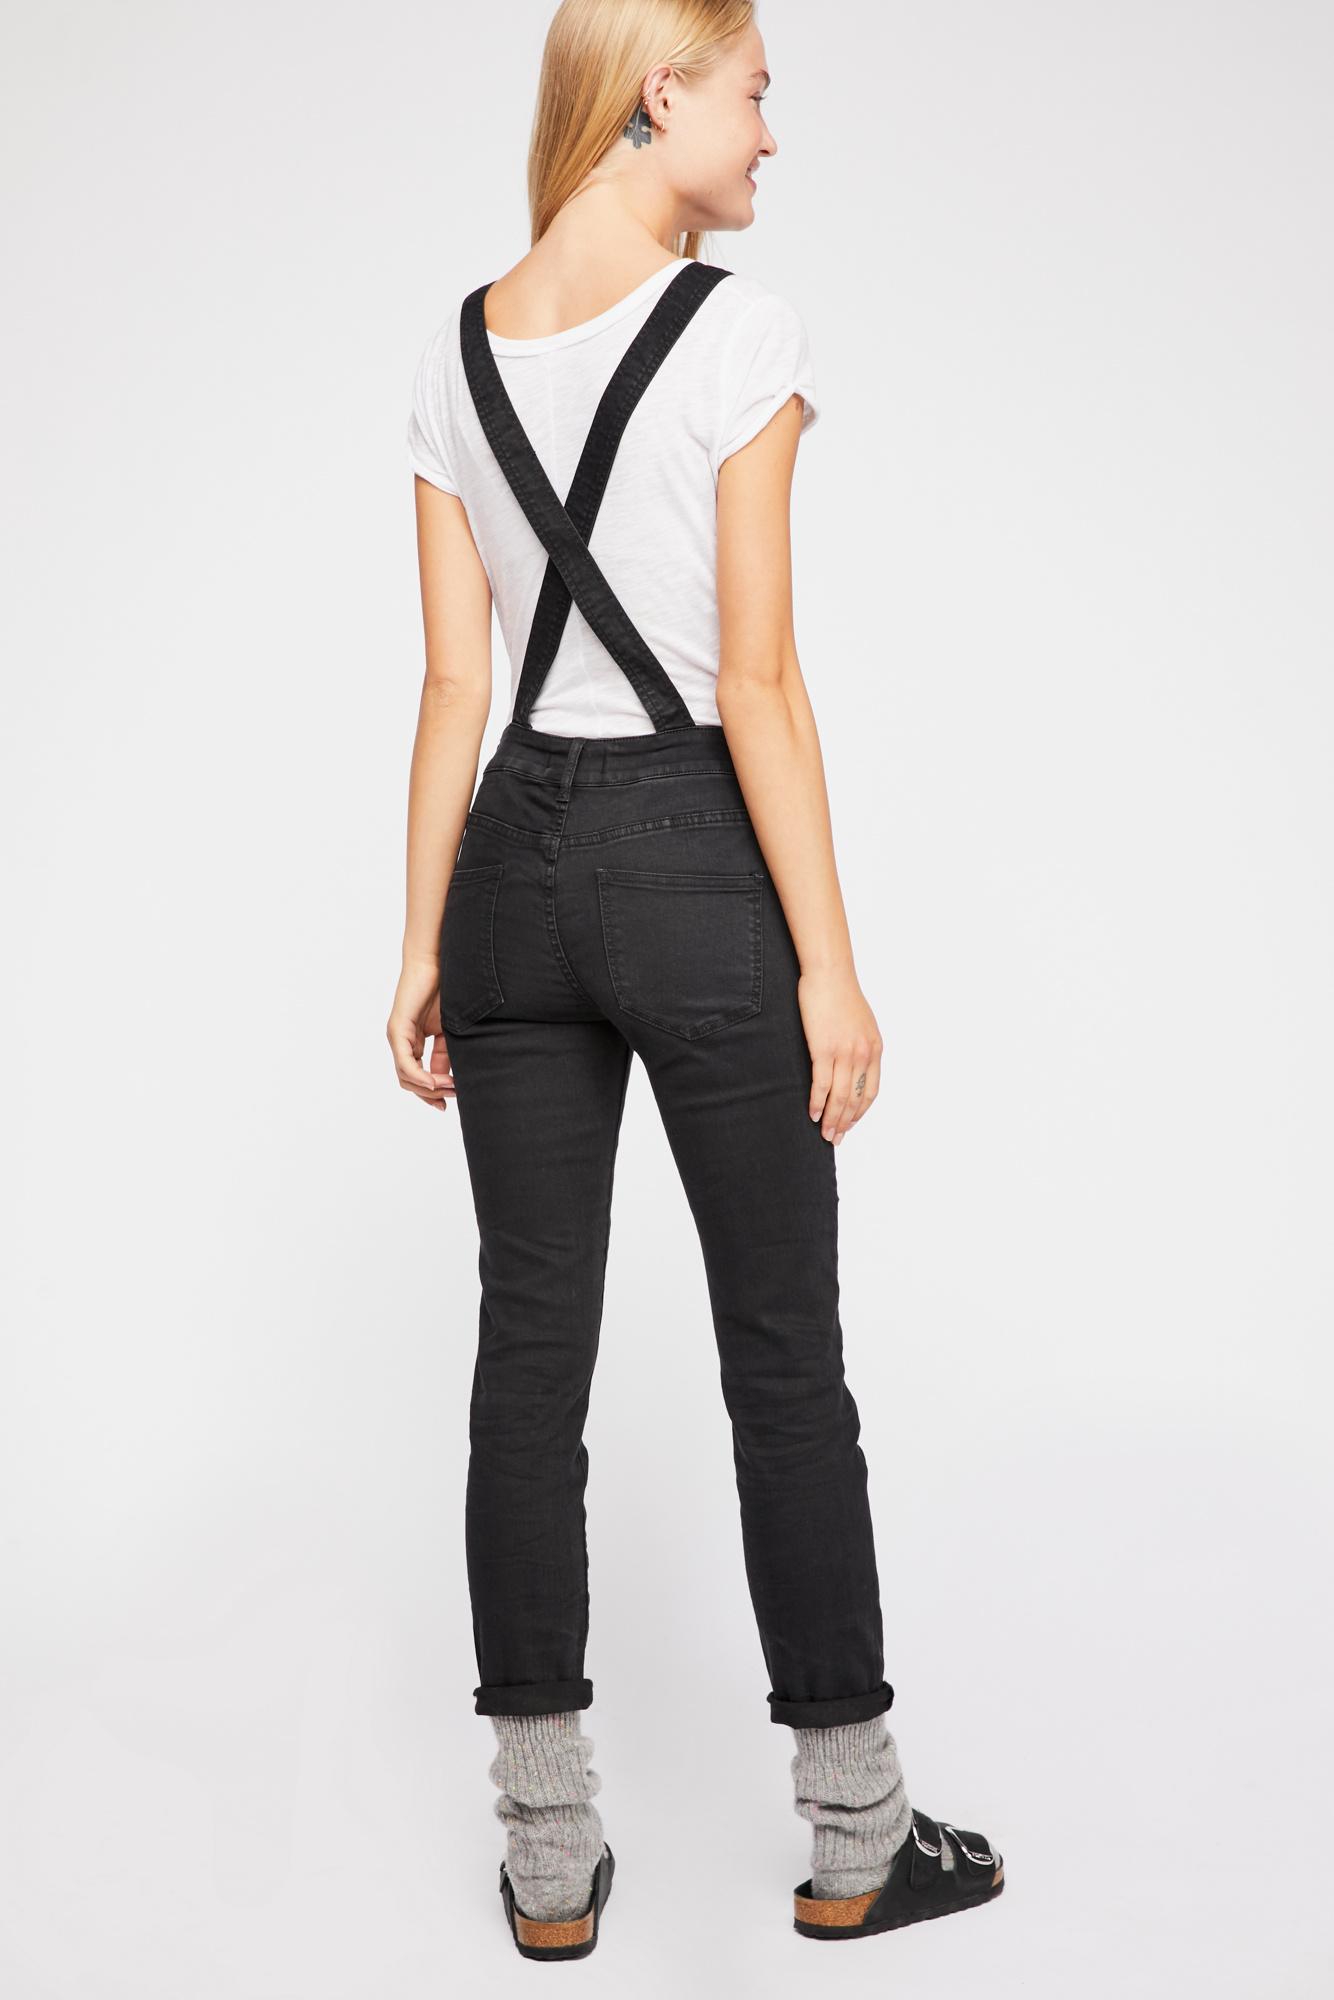 Free People Washed Denim Overall By We The Free in Black | Lyst